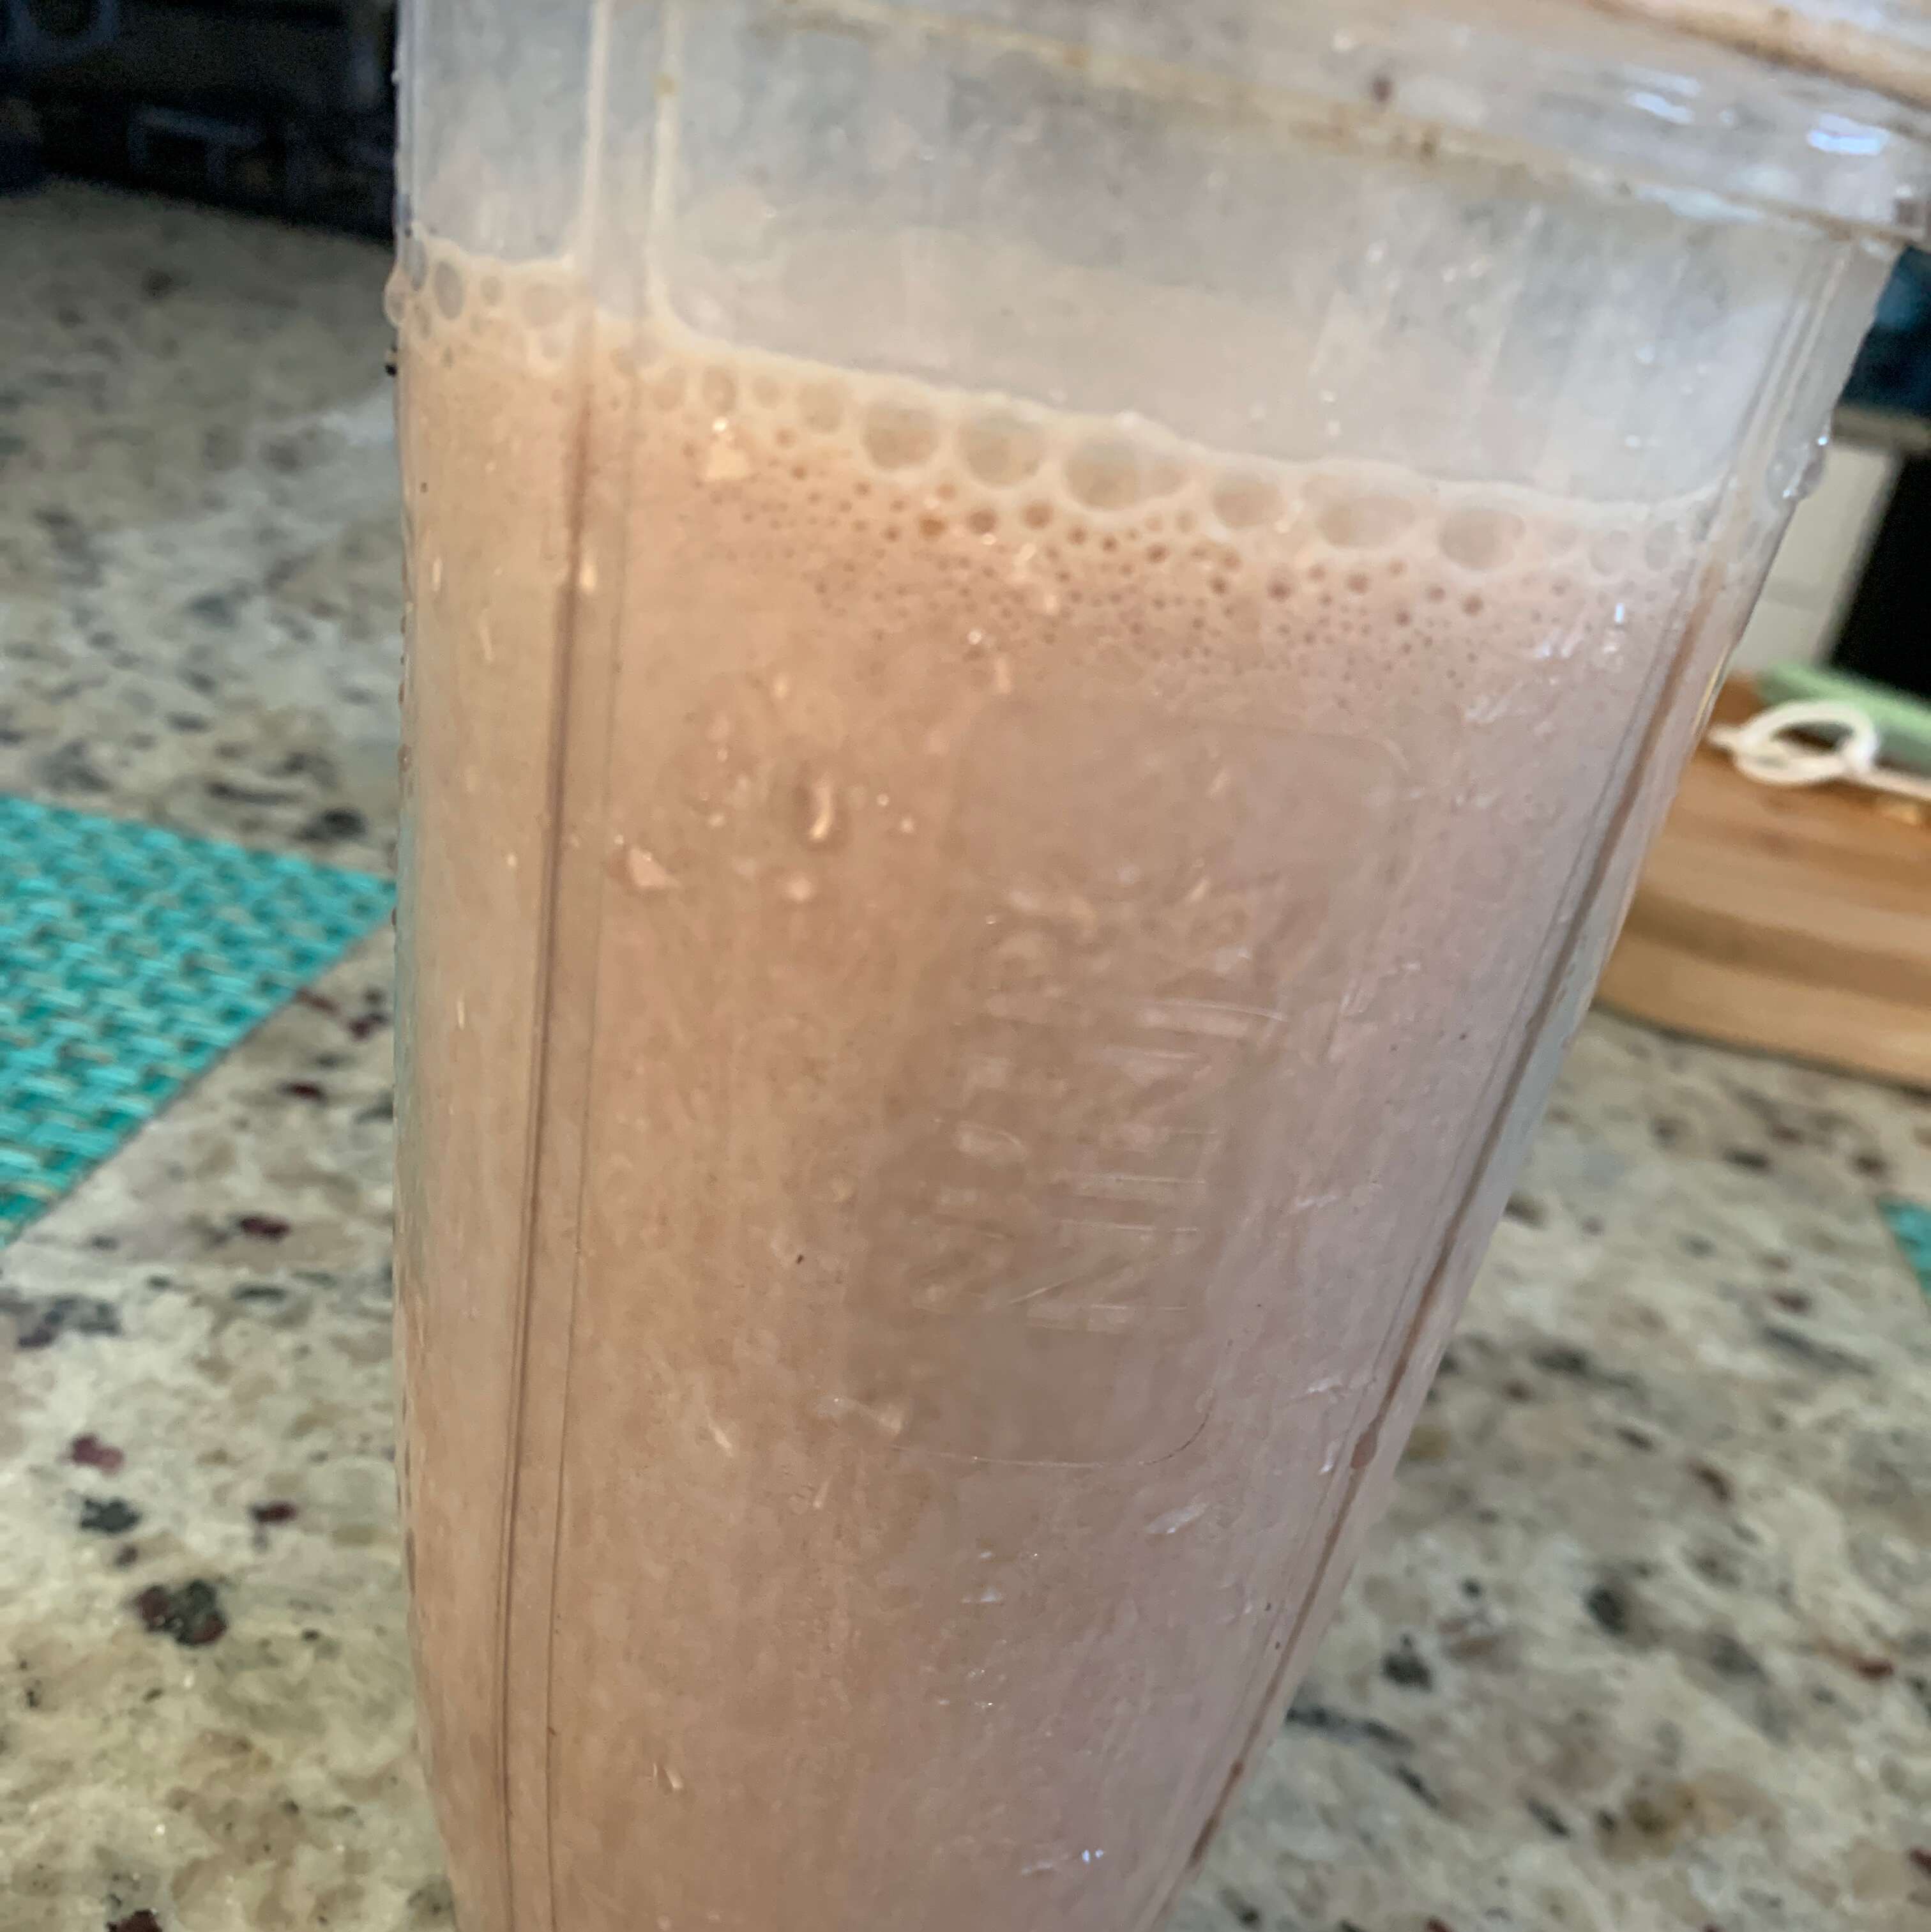 The Best Post Workout Shake Recipe | Allrecipes